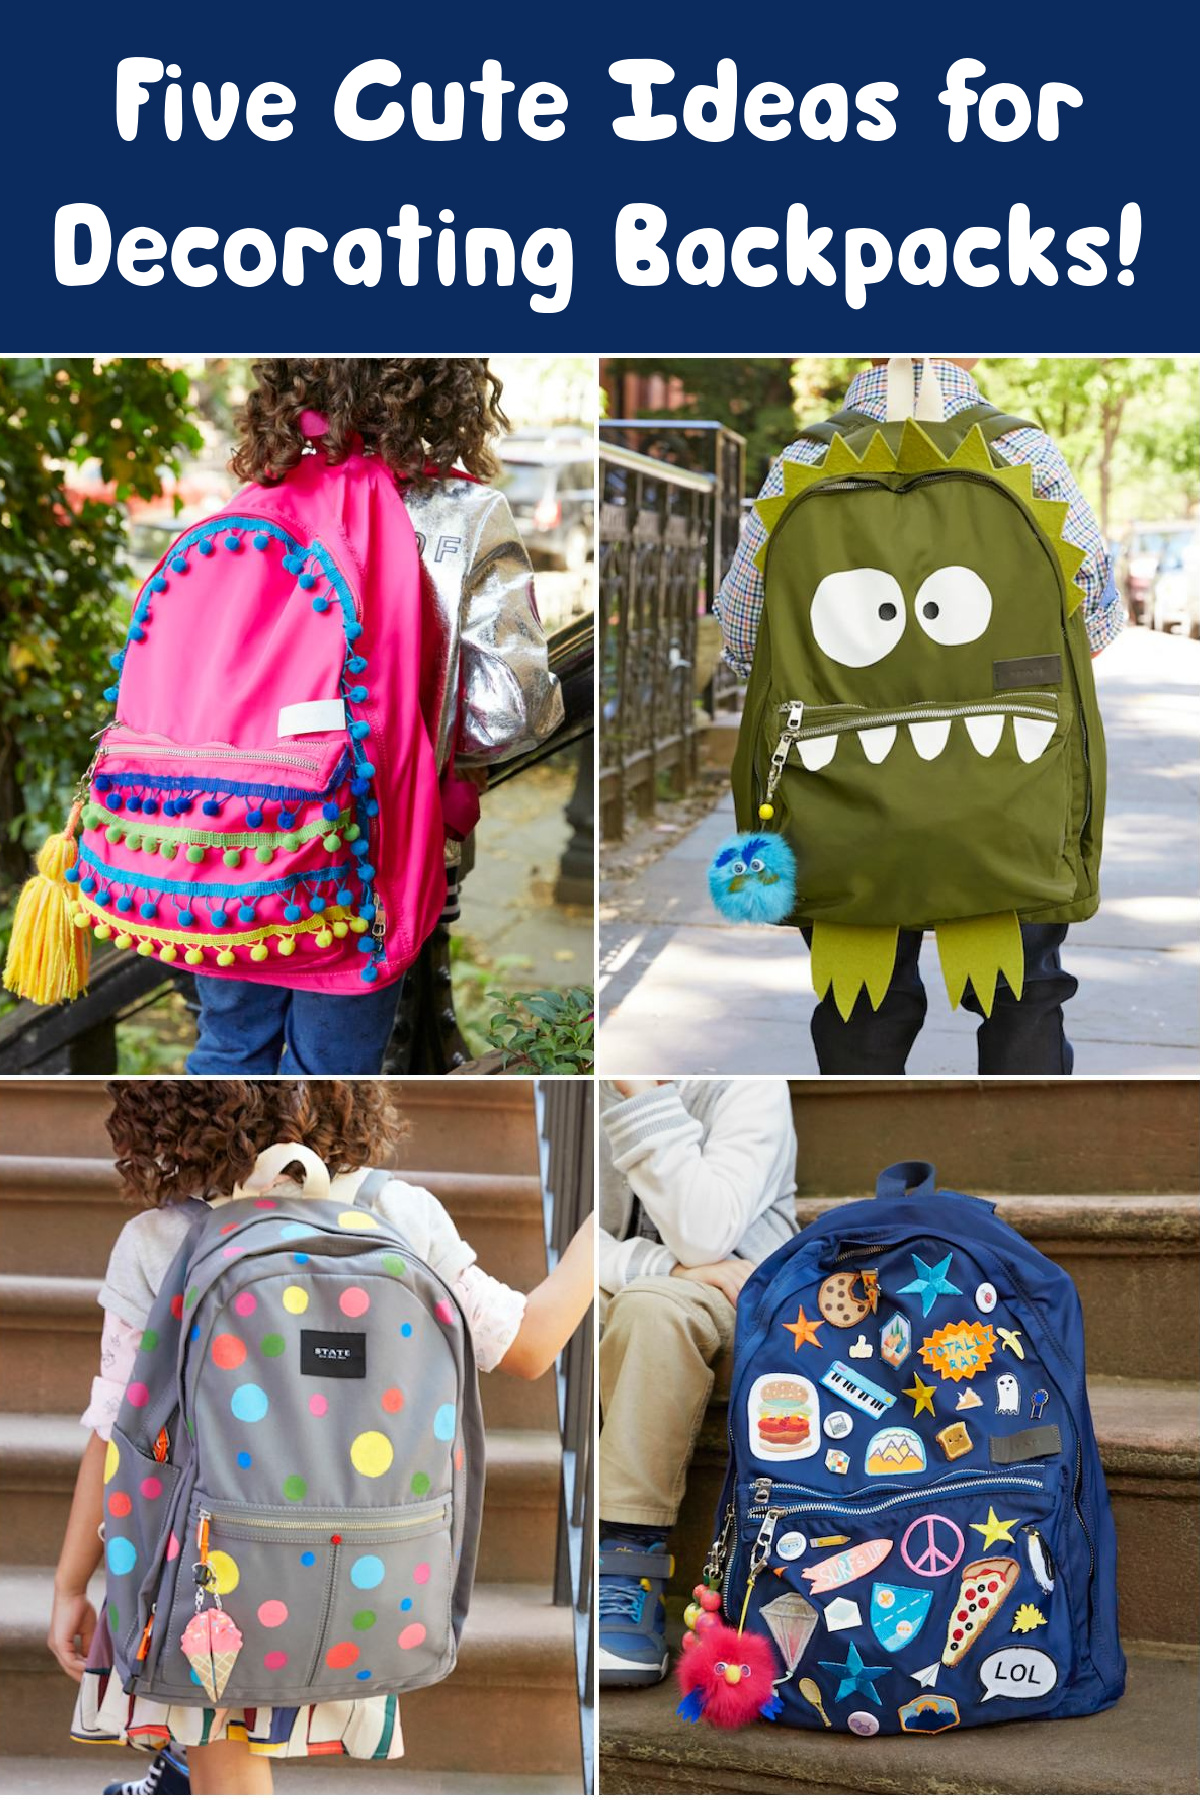 How to Personalize a Backpack (Get Five Ideas!) - DIY Candy